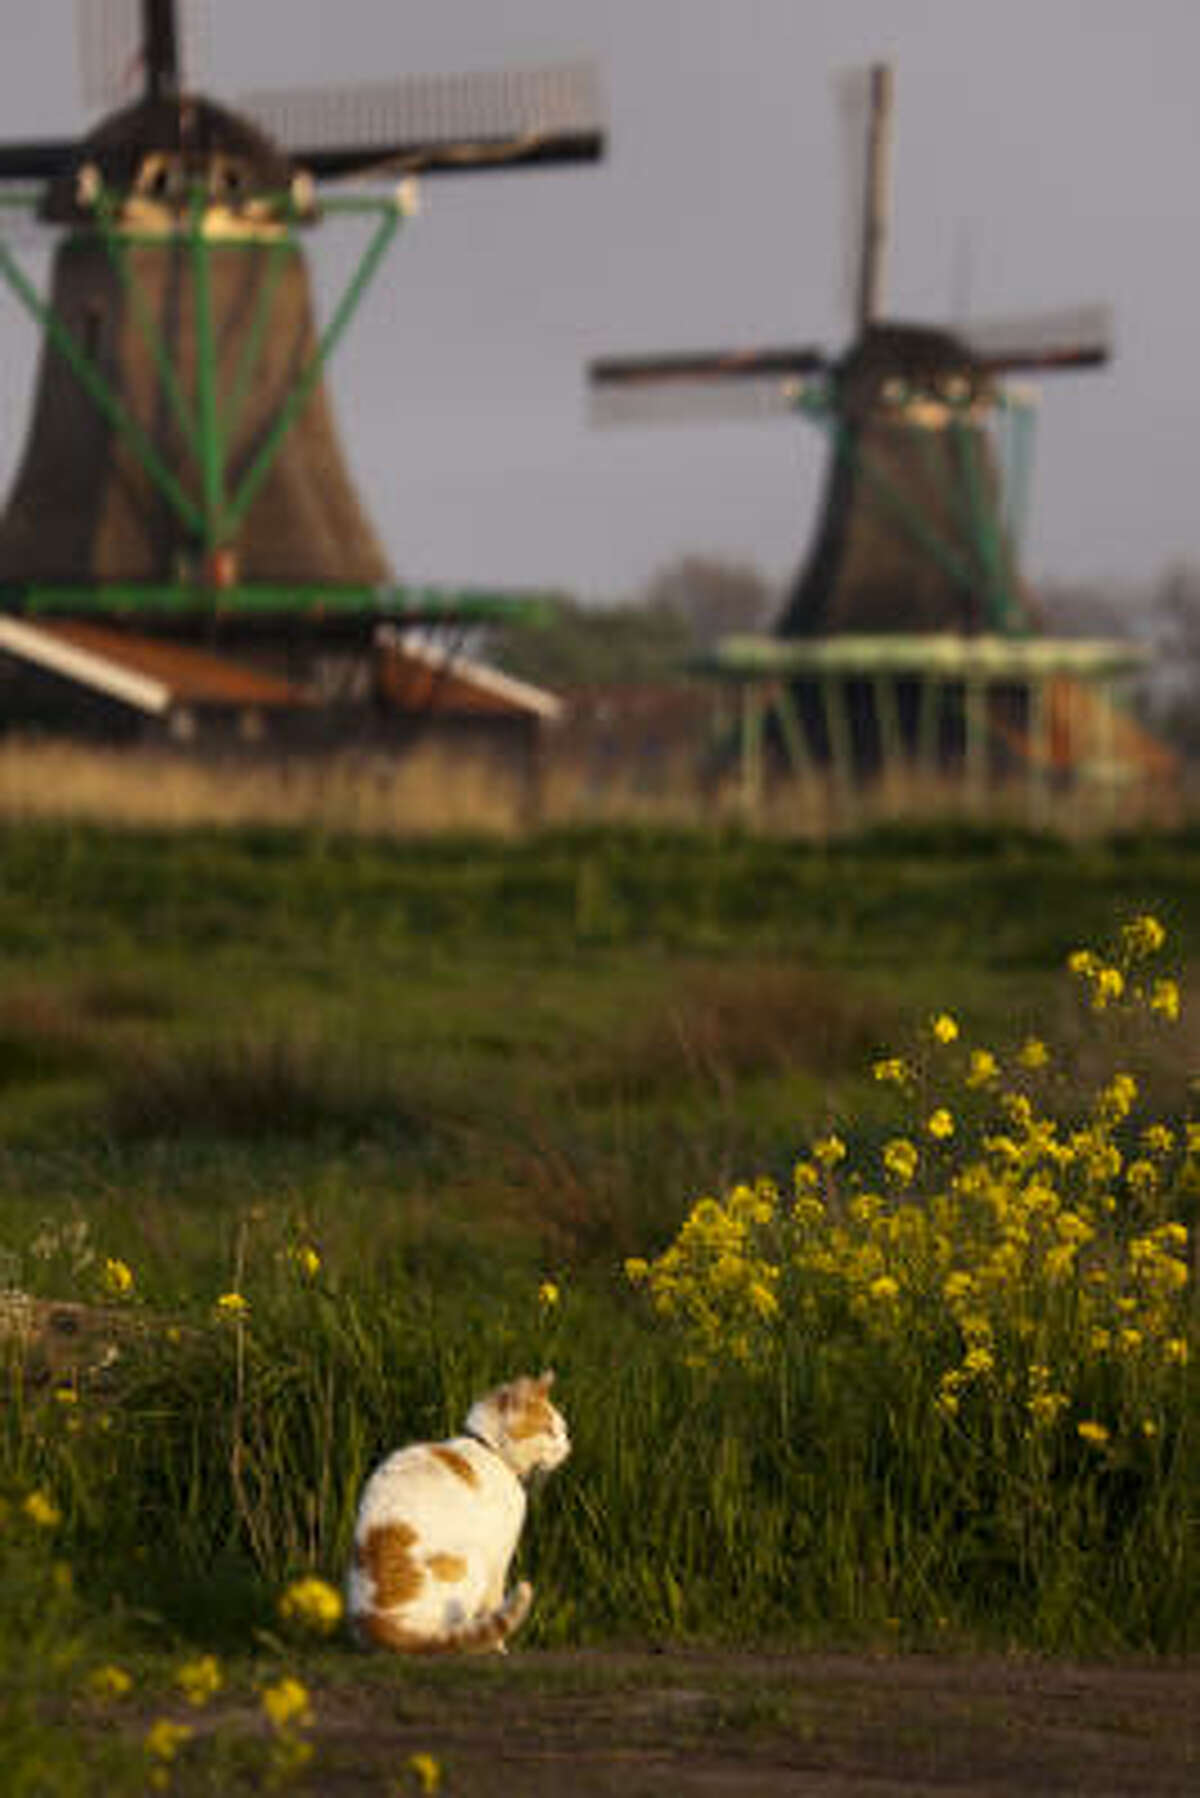 A cat takes in some evening sunshine amidst windmills at Zaanse Schans.